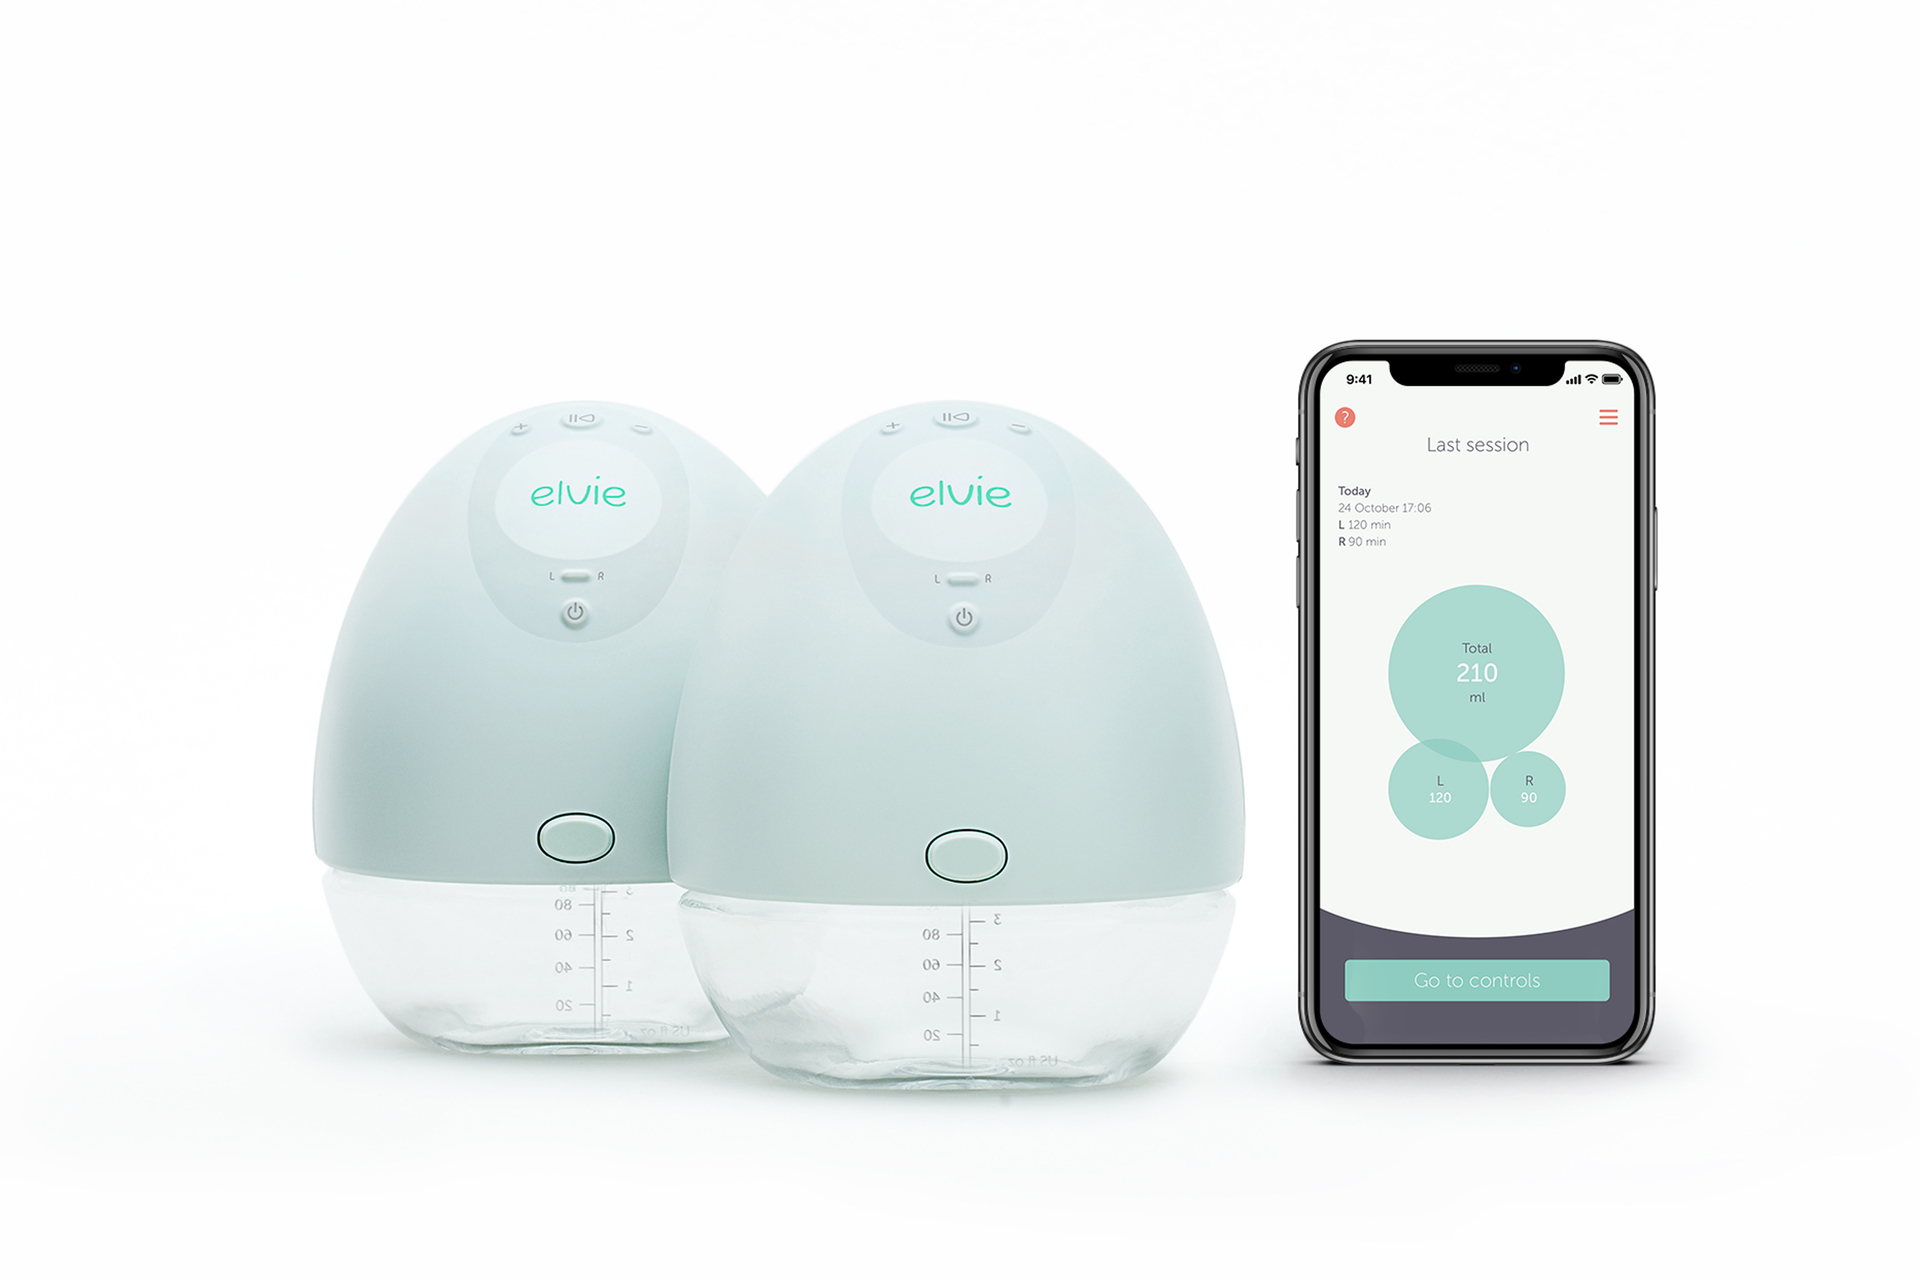 Elvie Stride Double Electric Breast Pump with CoolCarry Breastpump